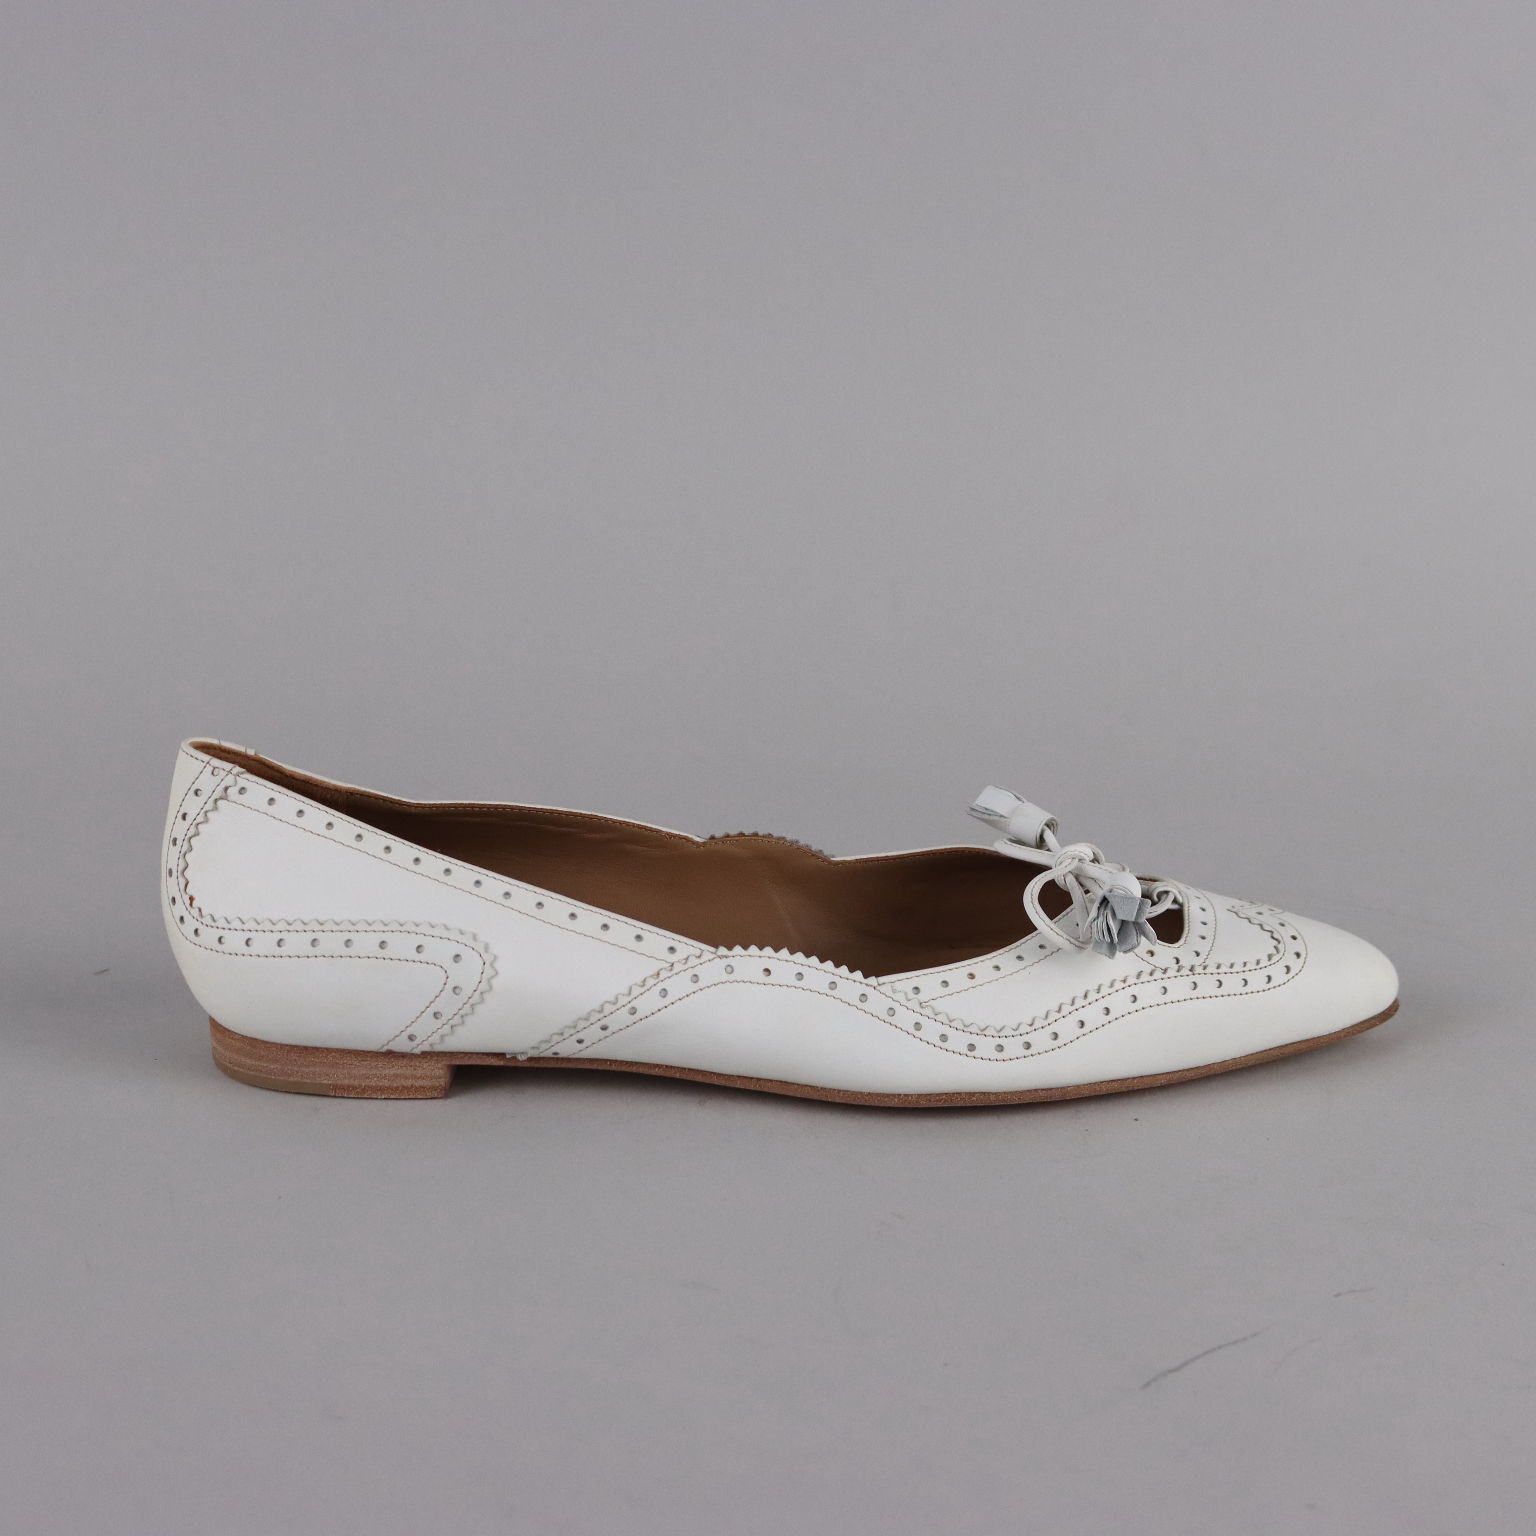 Second Hand Hermès Ballerina Shoes White Leather US Size 9 France